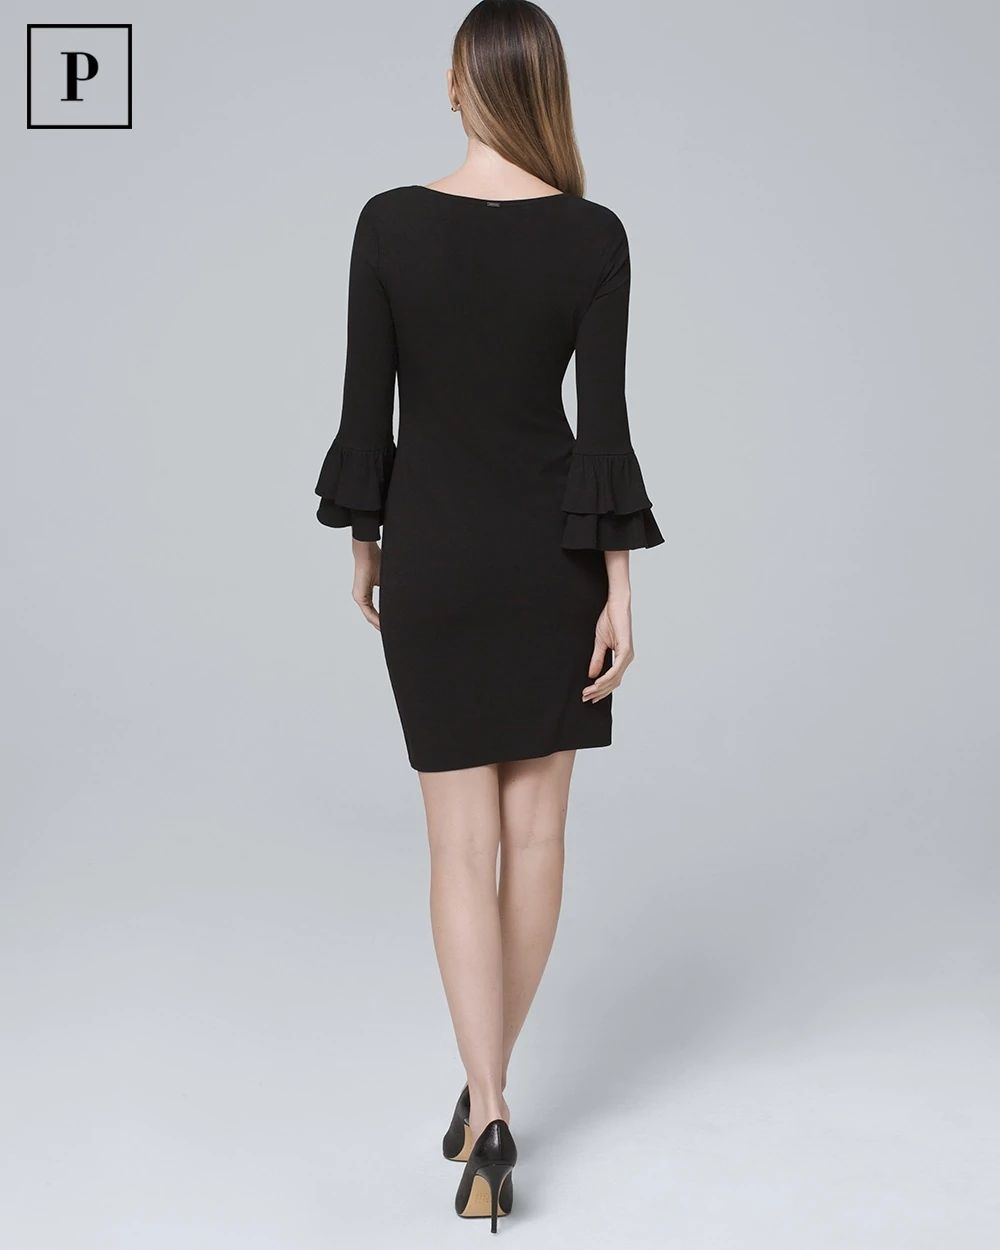 Petite Tiered-Sleeve Black Knit Shift Dress click to view larger image.